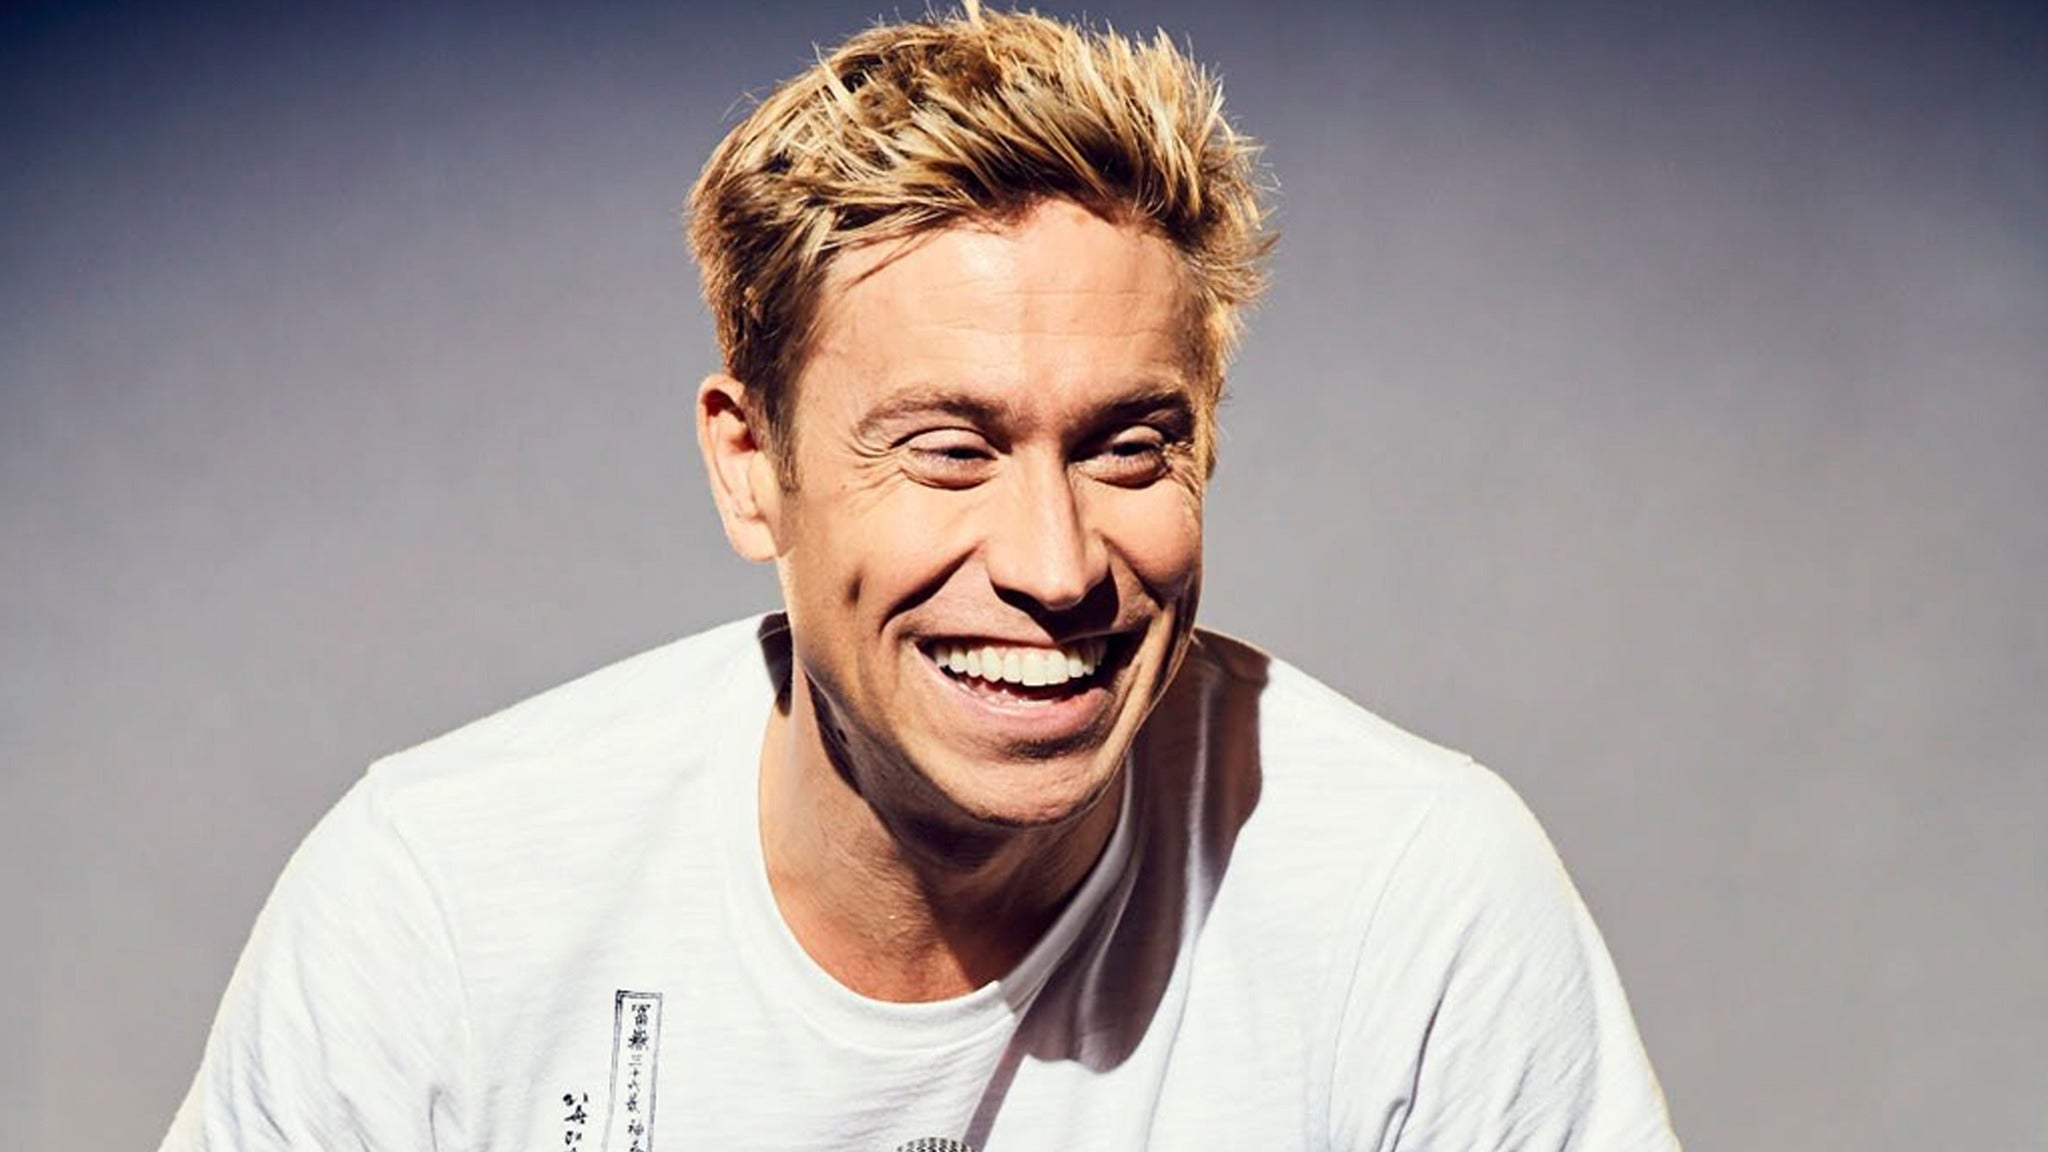 Russell Howard in Minneapolis promo photo for Live Nation Mobile presale offer code